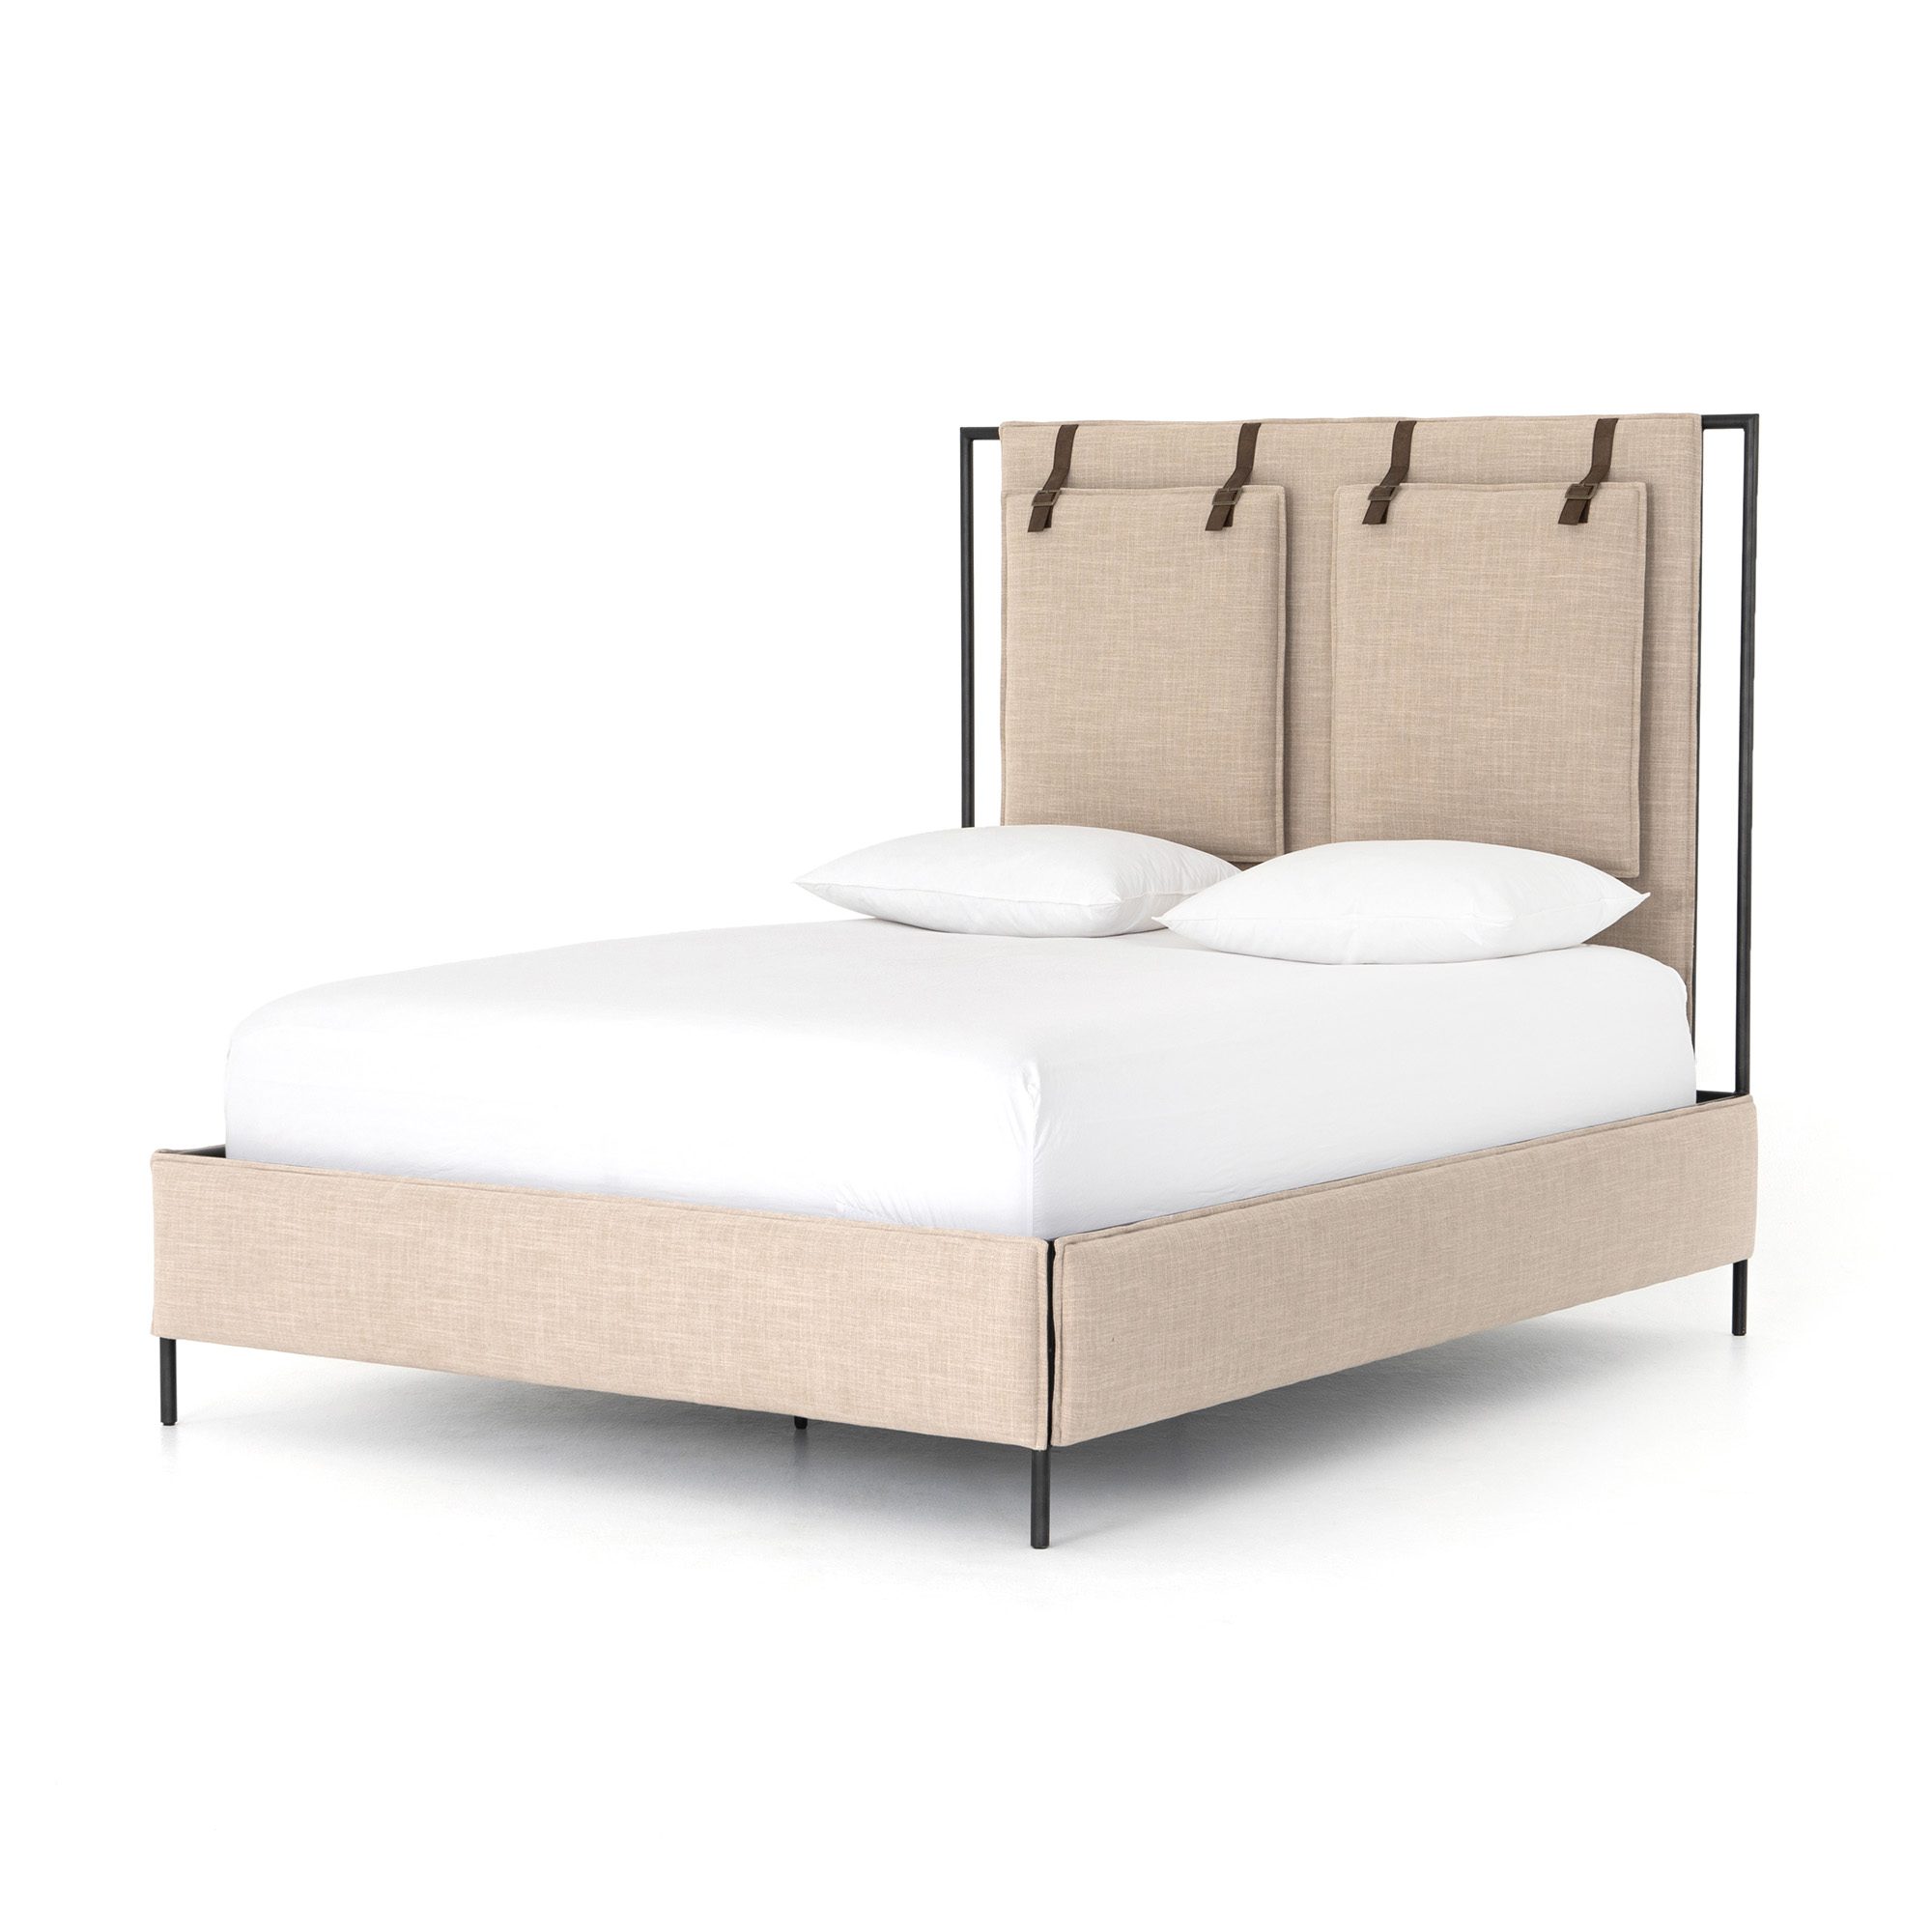 Leigh Upholstered King Bed - Hedi's Furniture